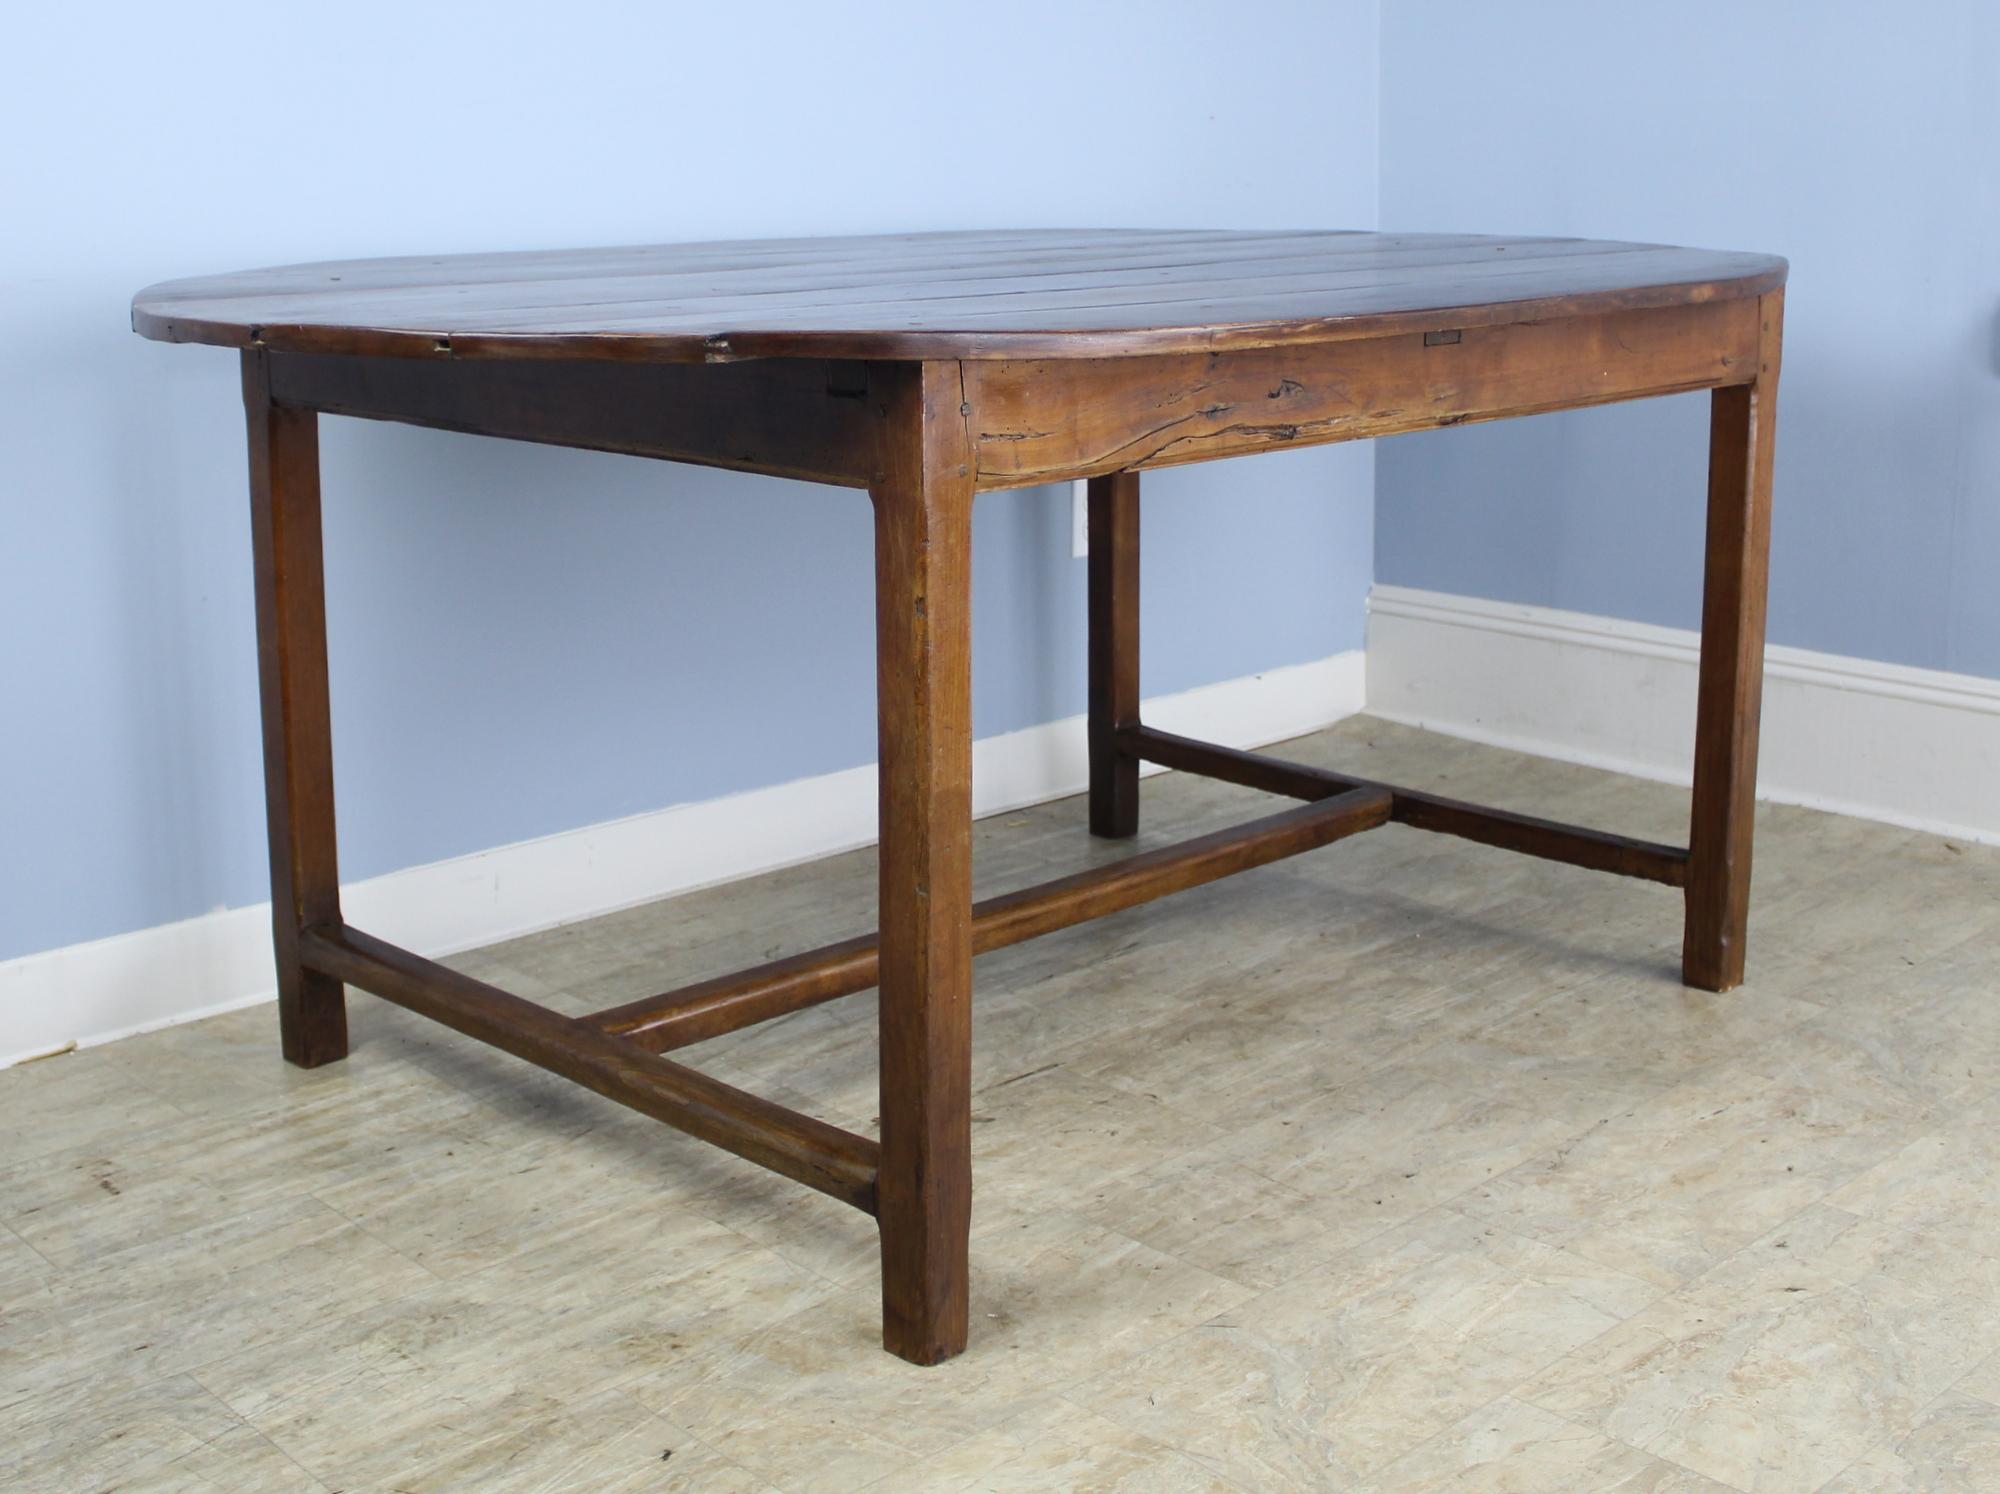 A generously proportioned oval table on a sturdy trestle base. With 43 inches between the legs on the long side, this table can seat six comfortably, eight in a pinch. Nicely hand planed planks and good color give this table real character. Some